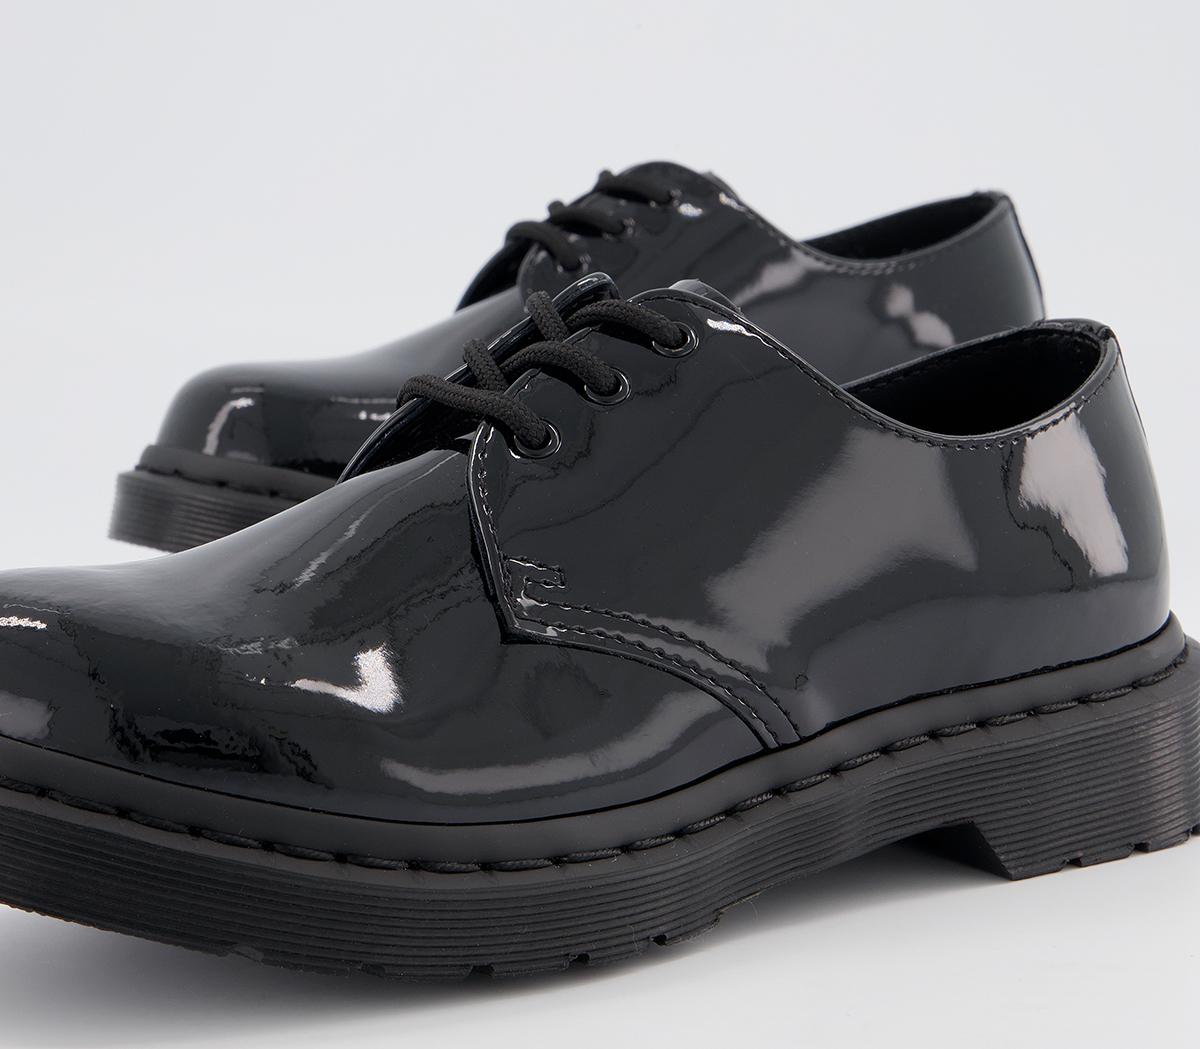 Dr. Martens 1461 3 Eyelet Lace Up Shoes Black Mono - Flat Shoes for Women